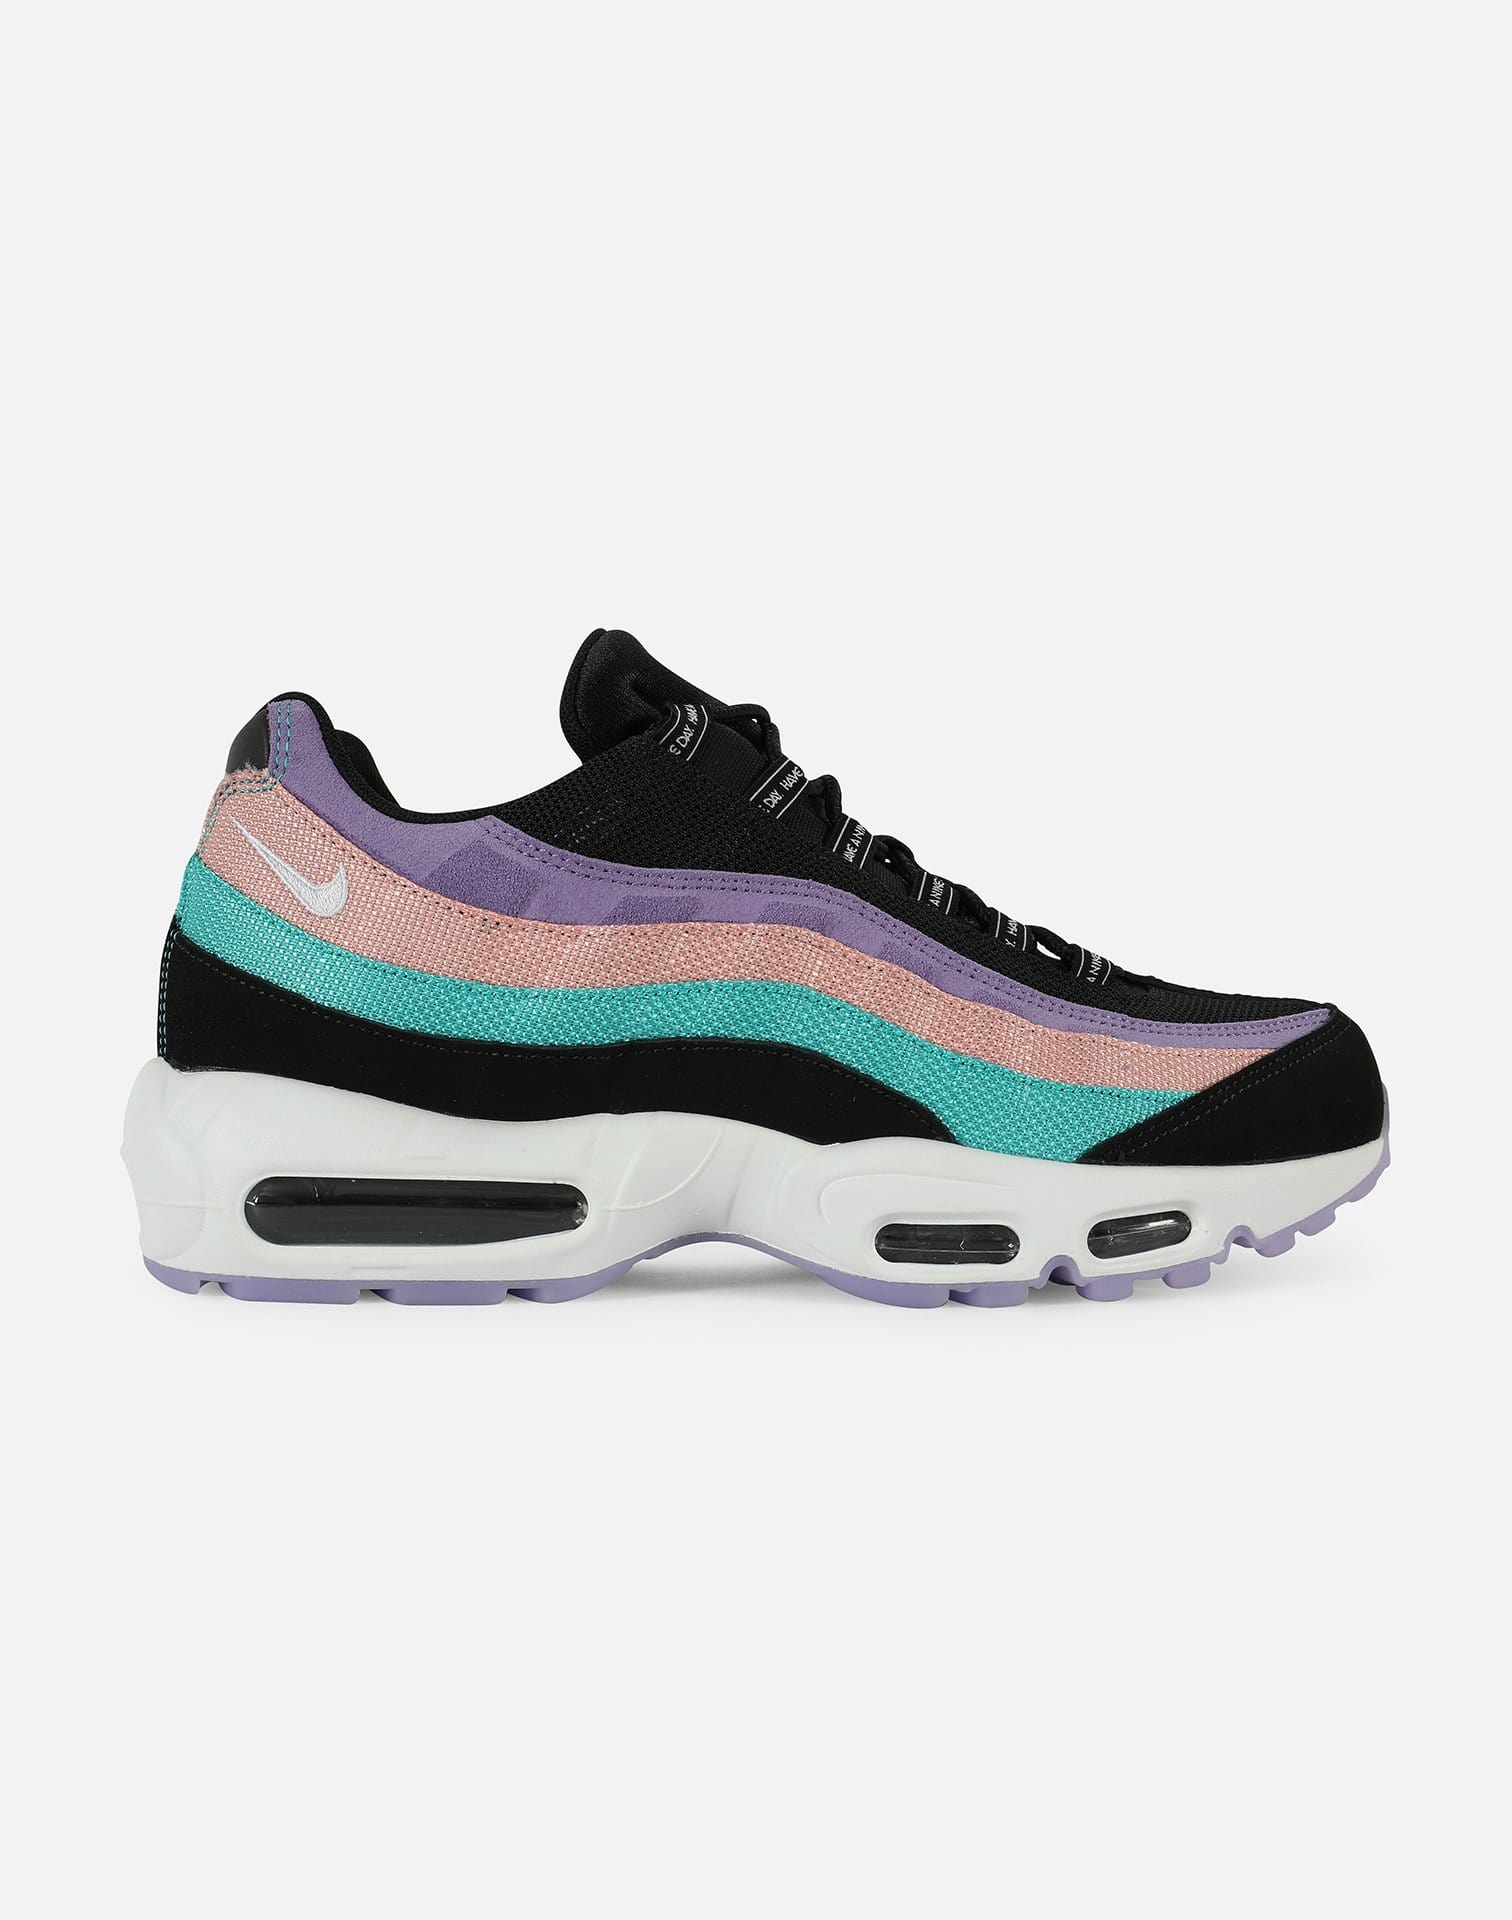 Nike Men's Air Max 95 'Have A Nike Day'